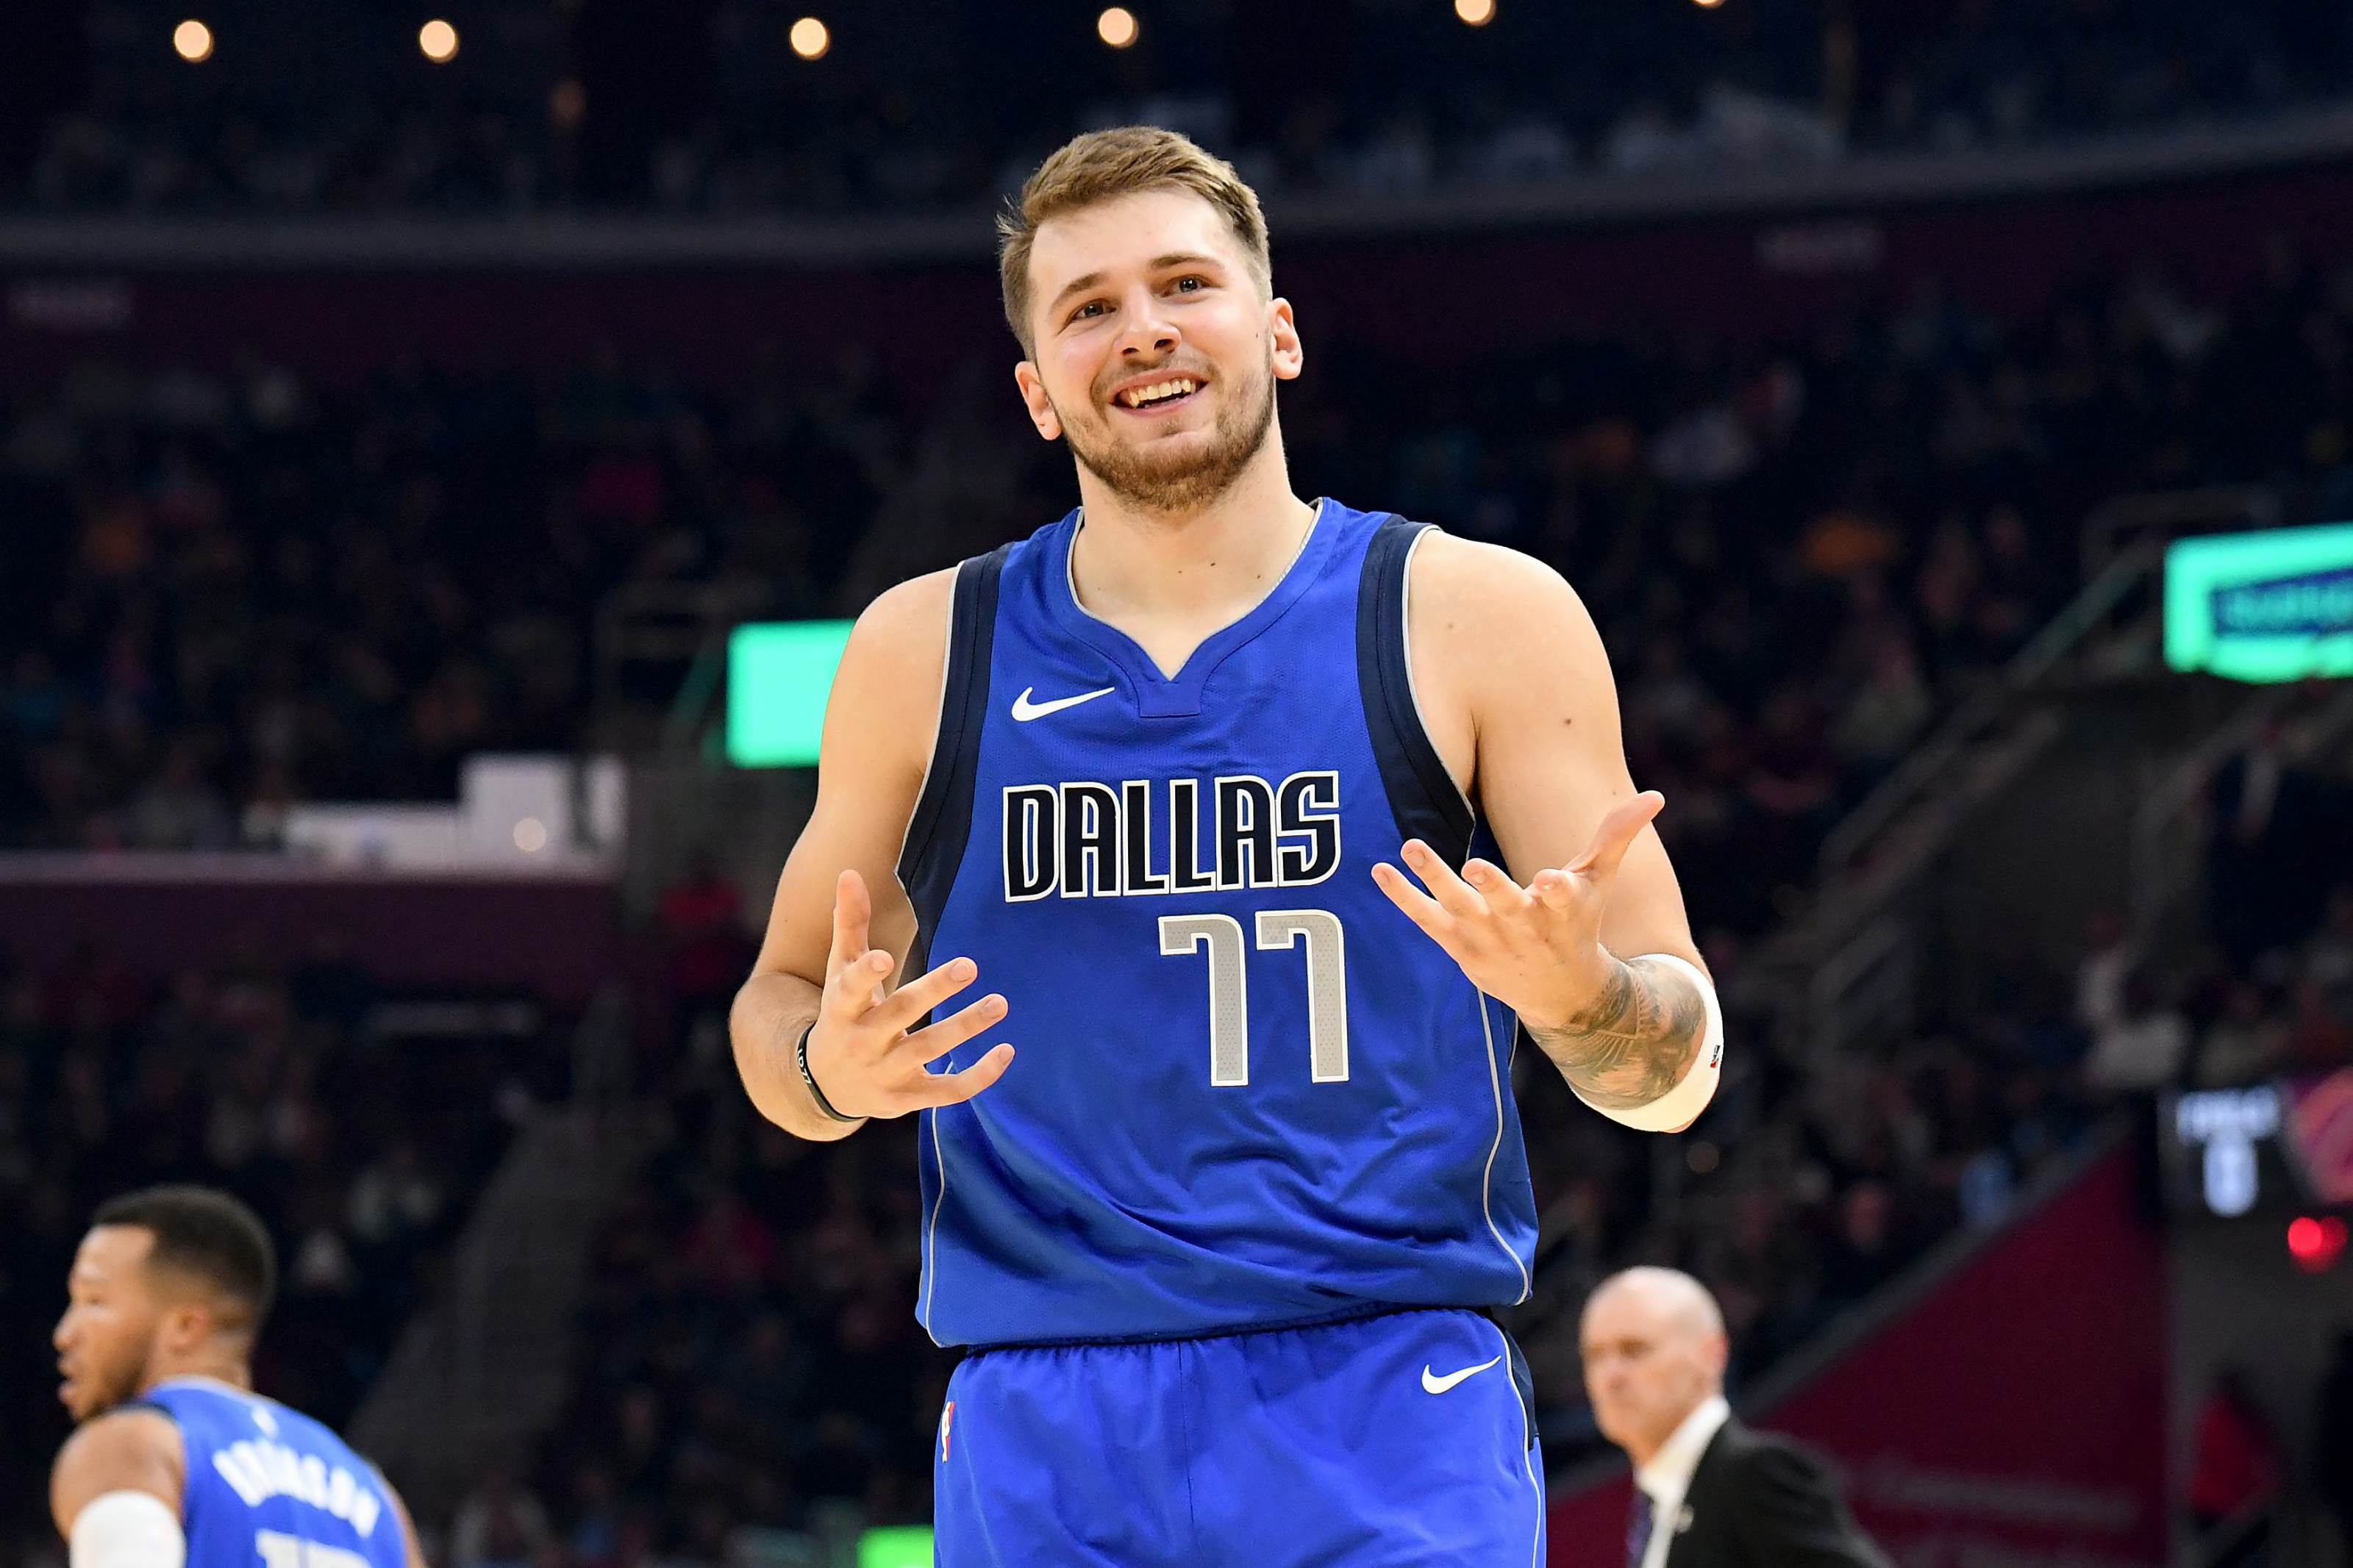 Players are going to want to join Mavericks to play with Luka Doncic